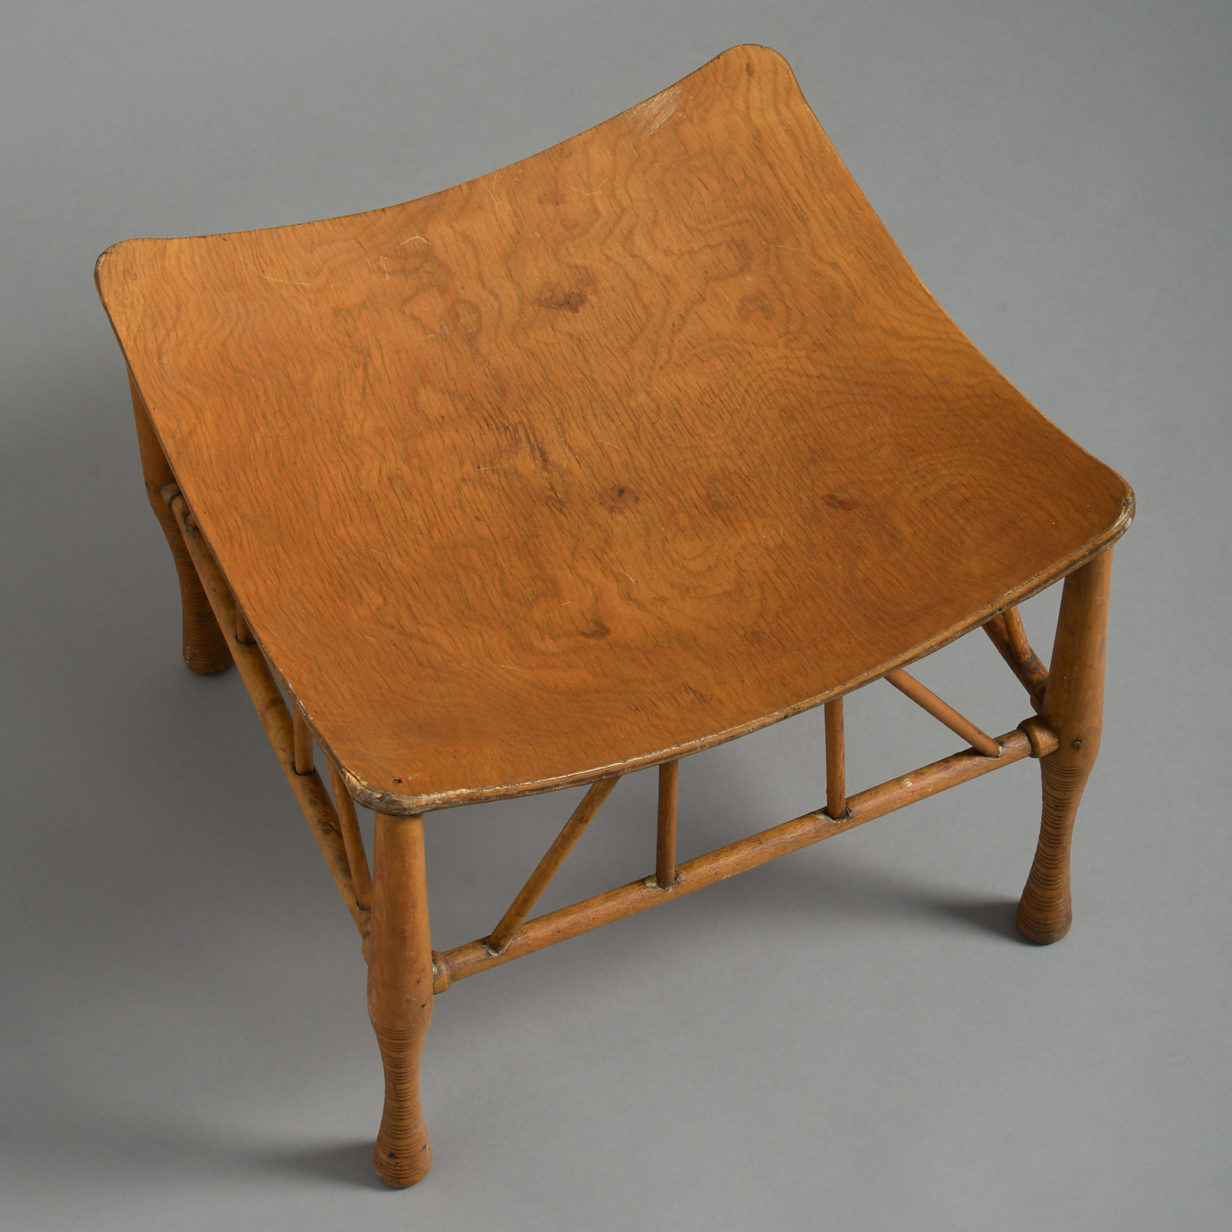 A bentwood thebes stool